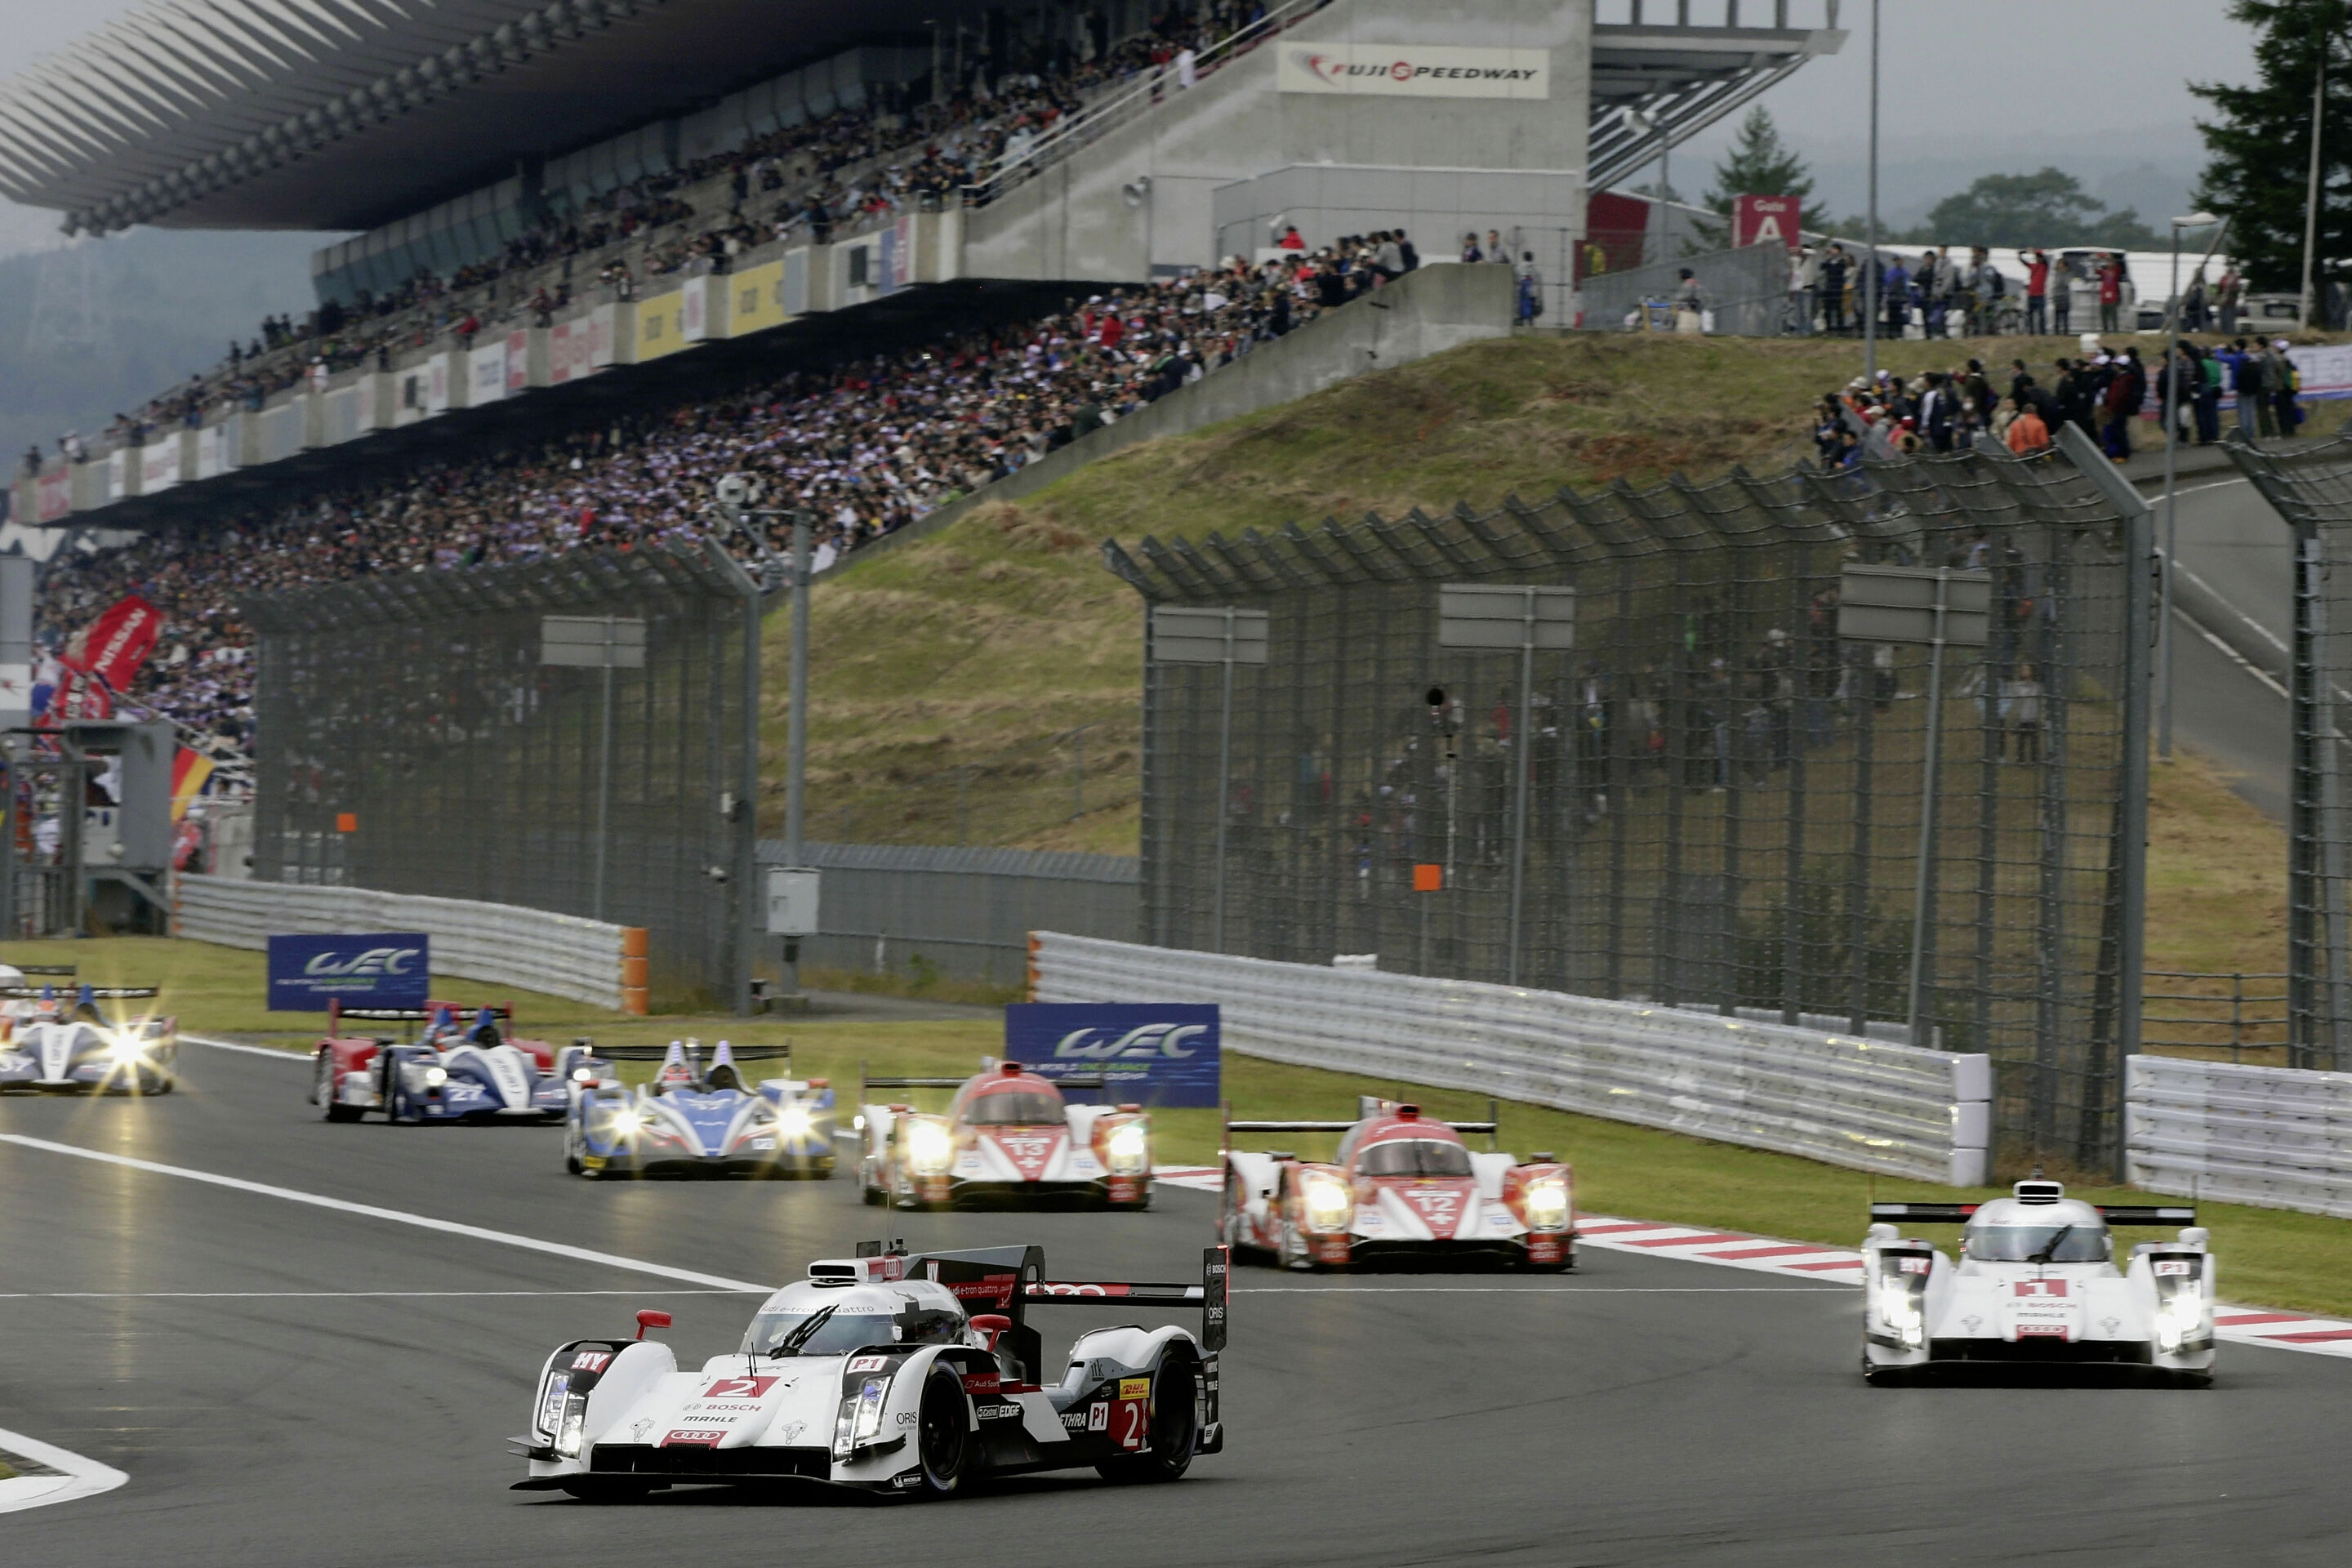 Audi maintains its challenge for WEC title in Japan